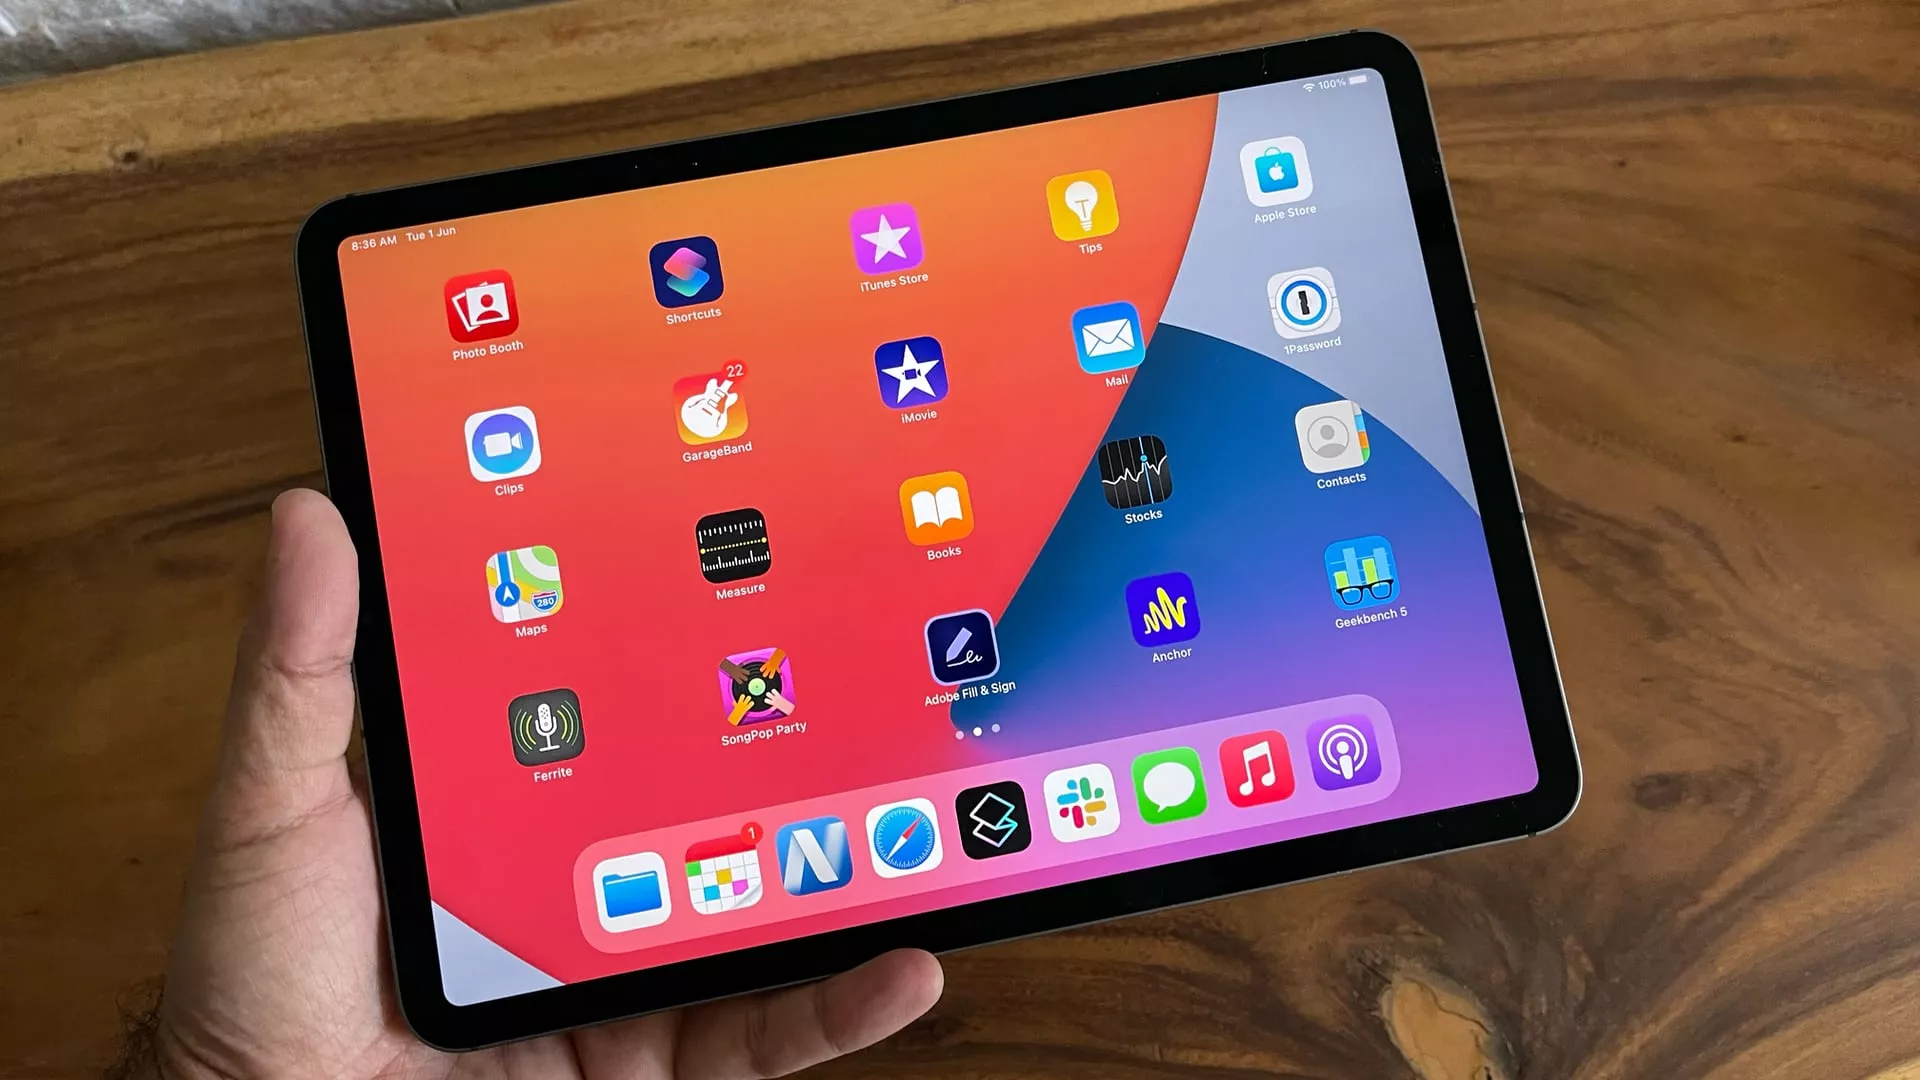 Ipados 17 Showcasing Its Innovative Features And Enhancements For Enhanced Productivity And User Experience.